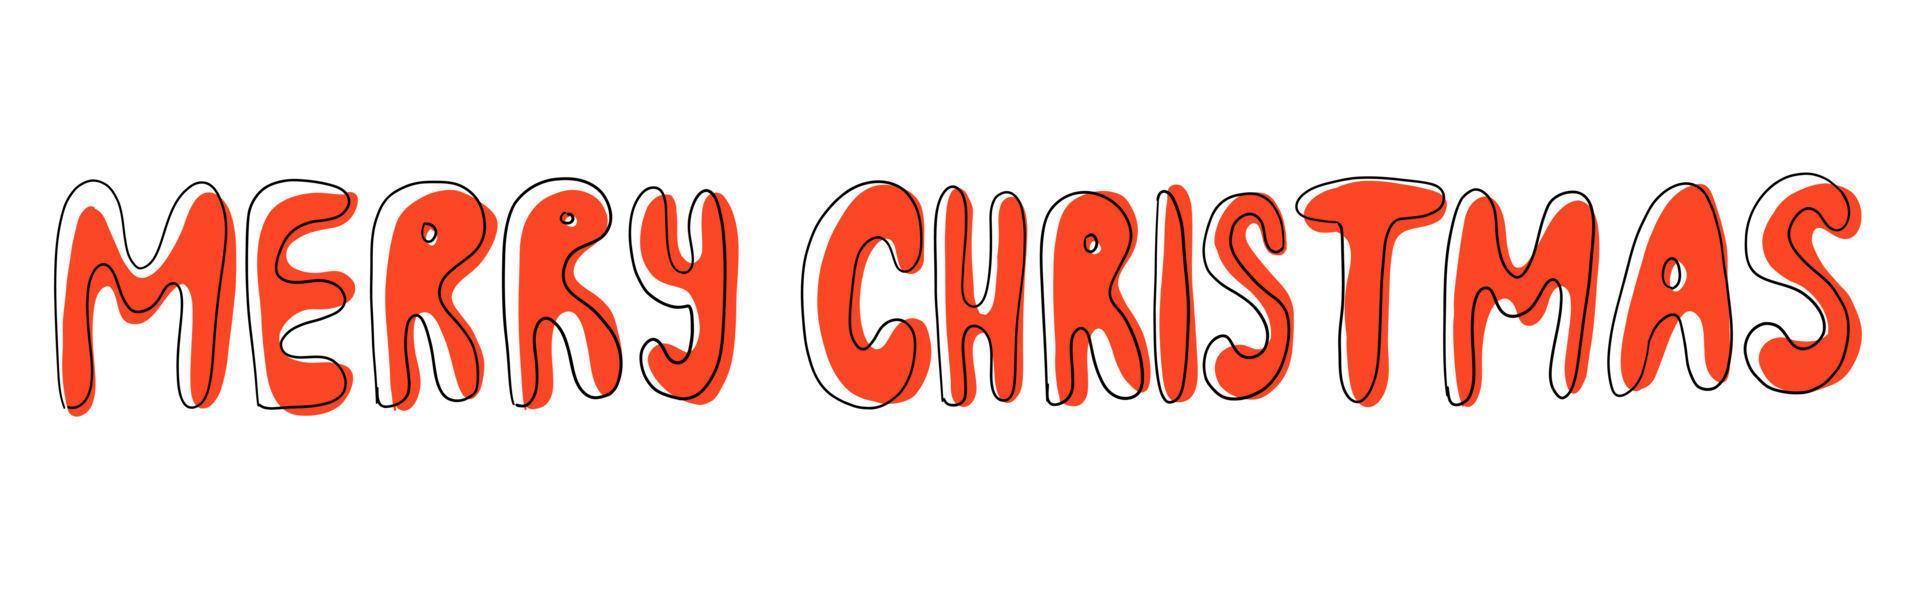 Merry Christmas Vector Text. Hand Drawn Lettering. Illustration isolated on white background.